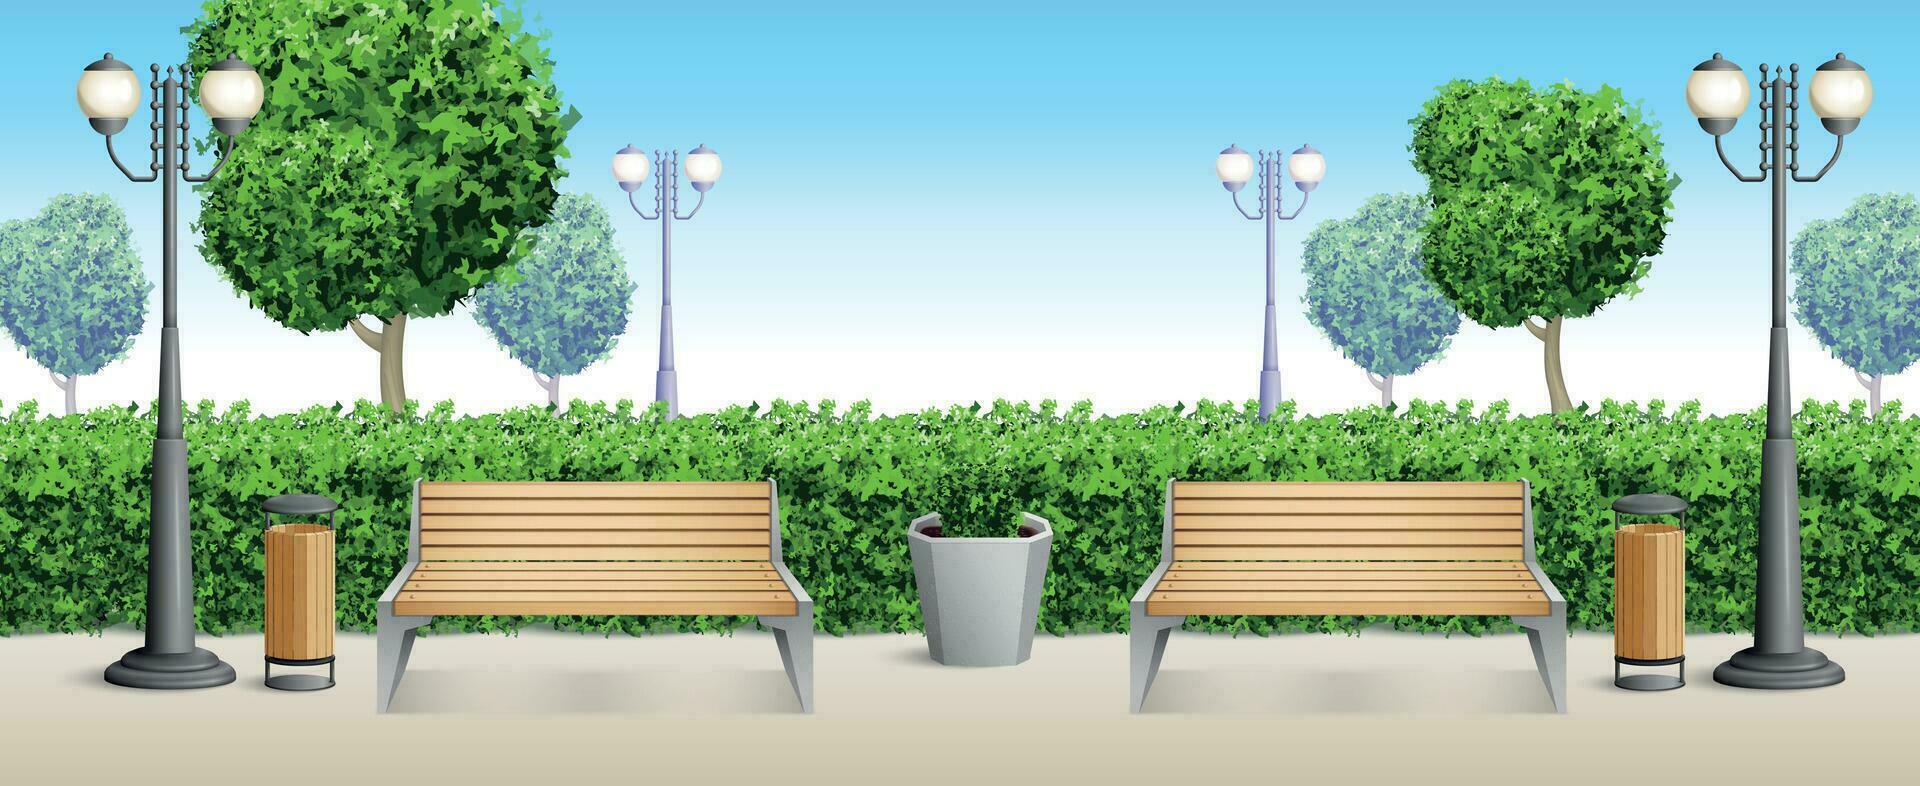 Realistic Park Bench Background Composition vector